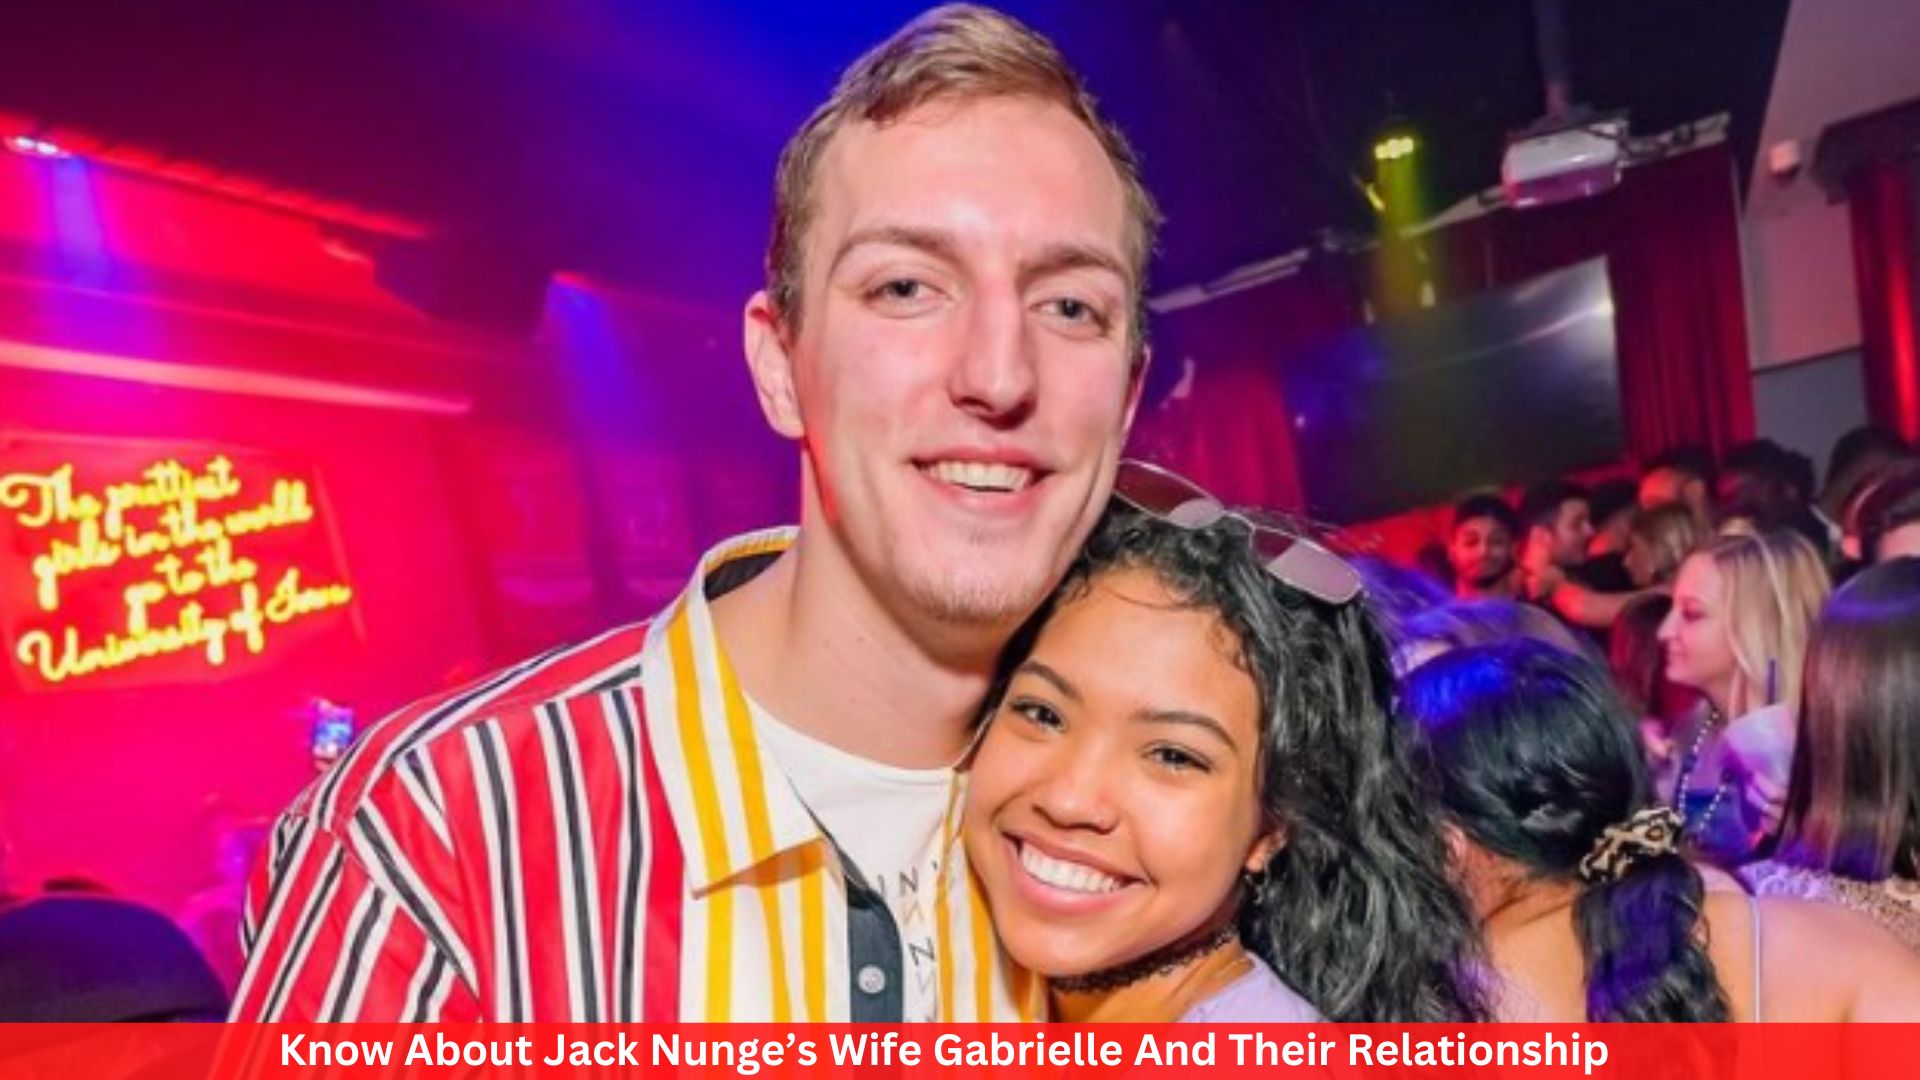 Know About Jack Nunge’s Wife Gabrielle And Their Relationship